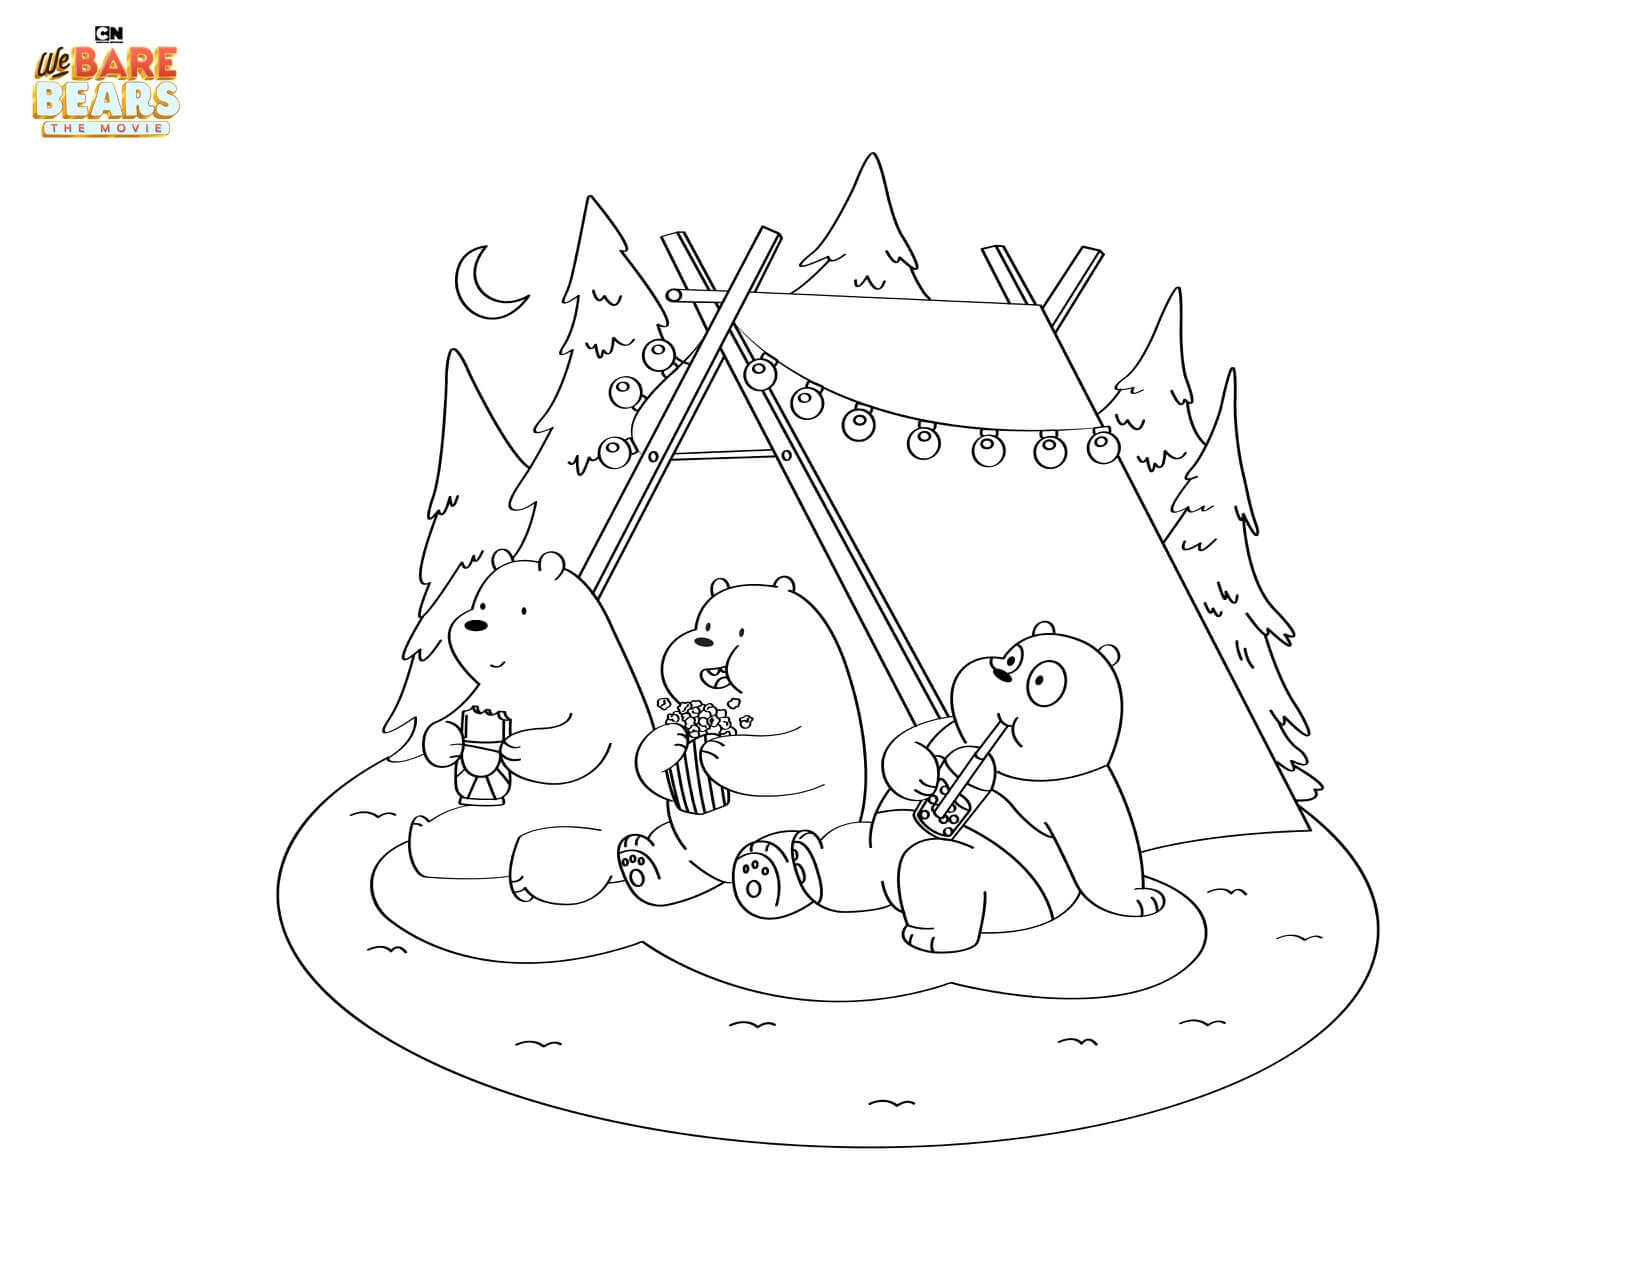 We Bare Bears Camping Coloring Page For Kids